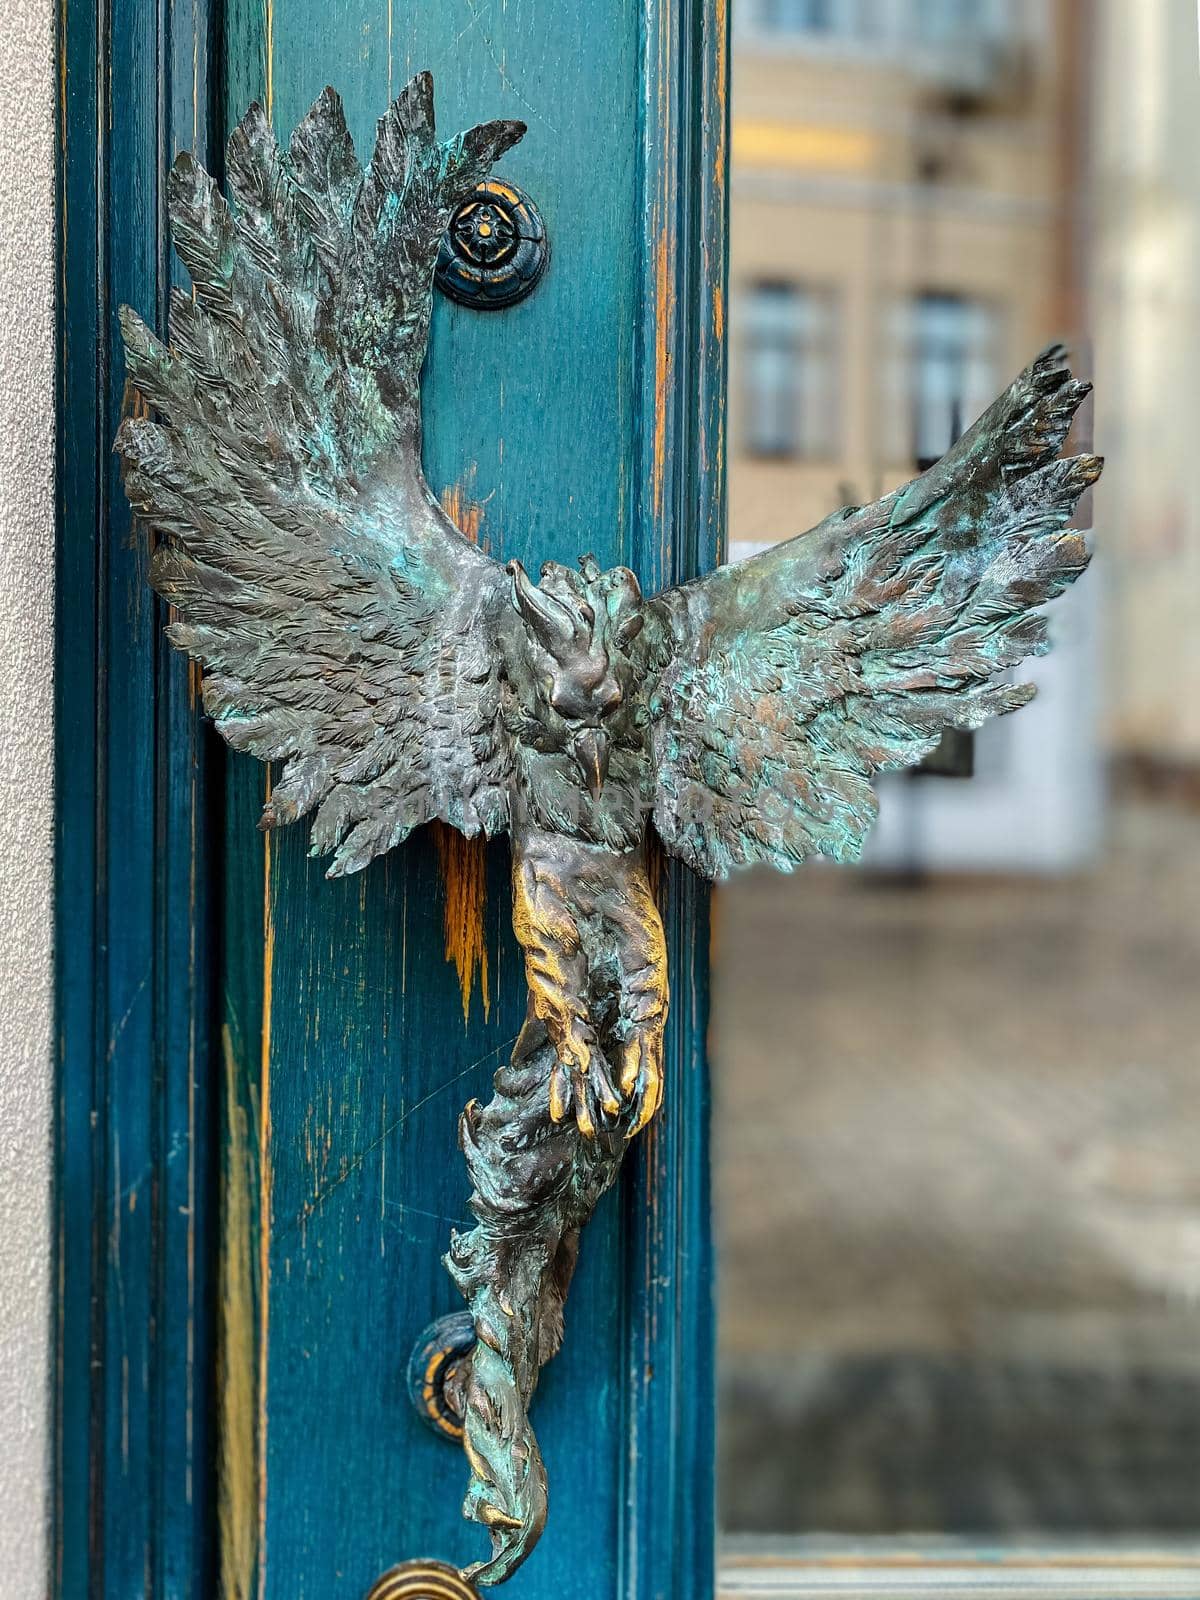 Turquoise wooden and glass entrance with antique door handle in the form of a bird. Unusual details of ornate door. Vintage iron door knob